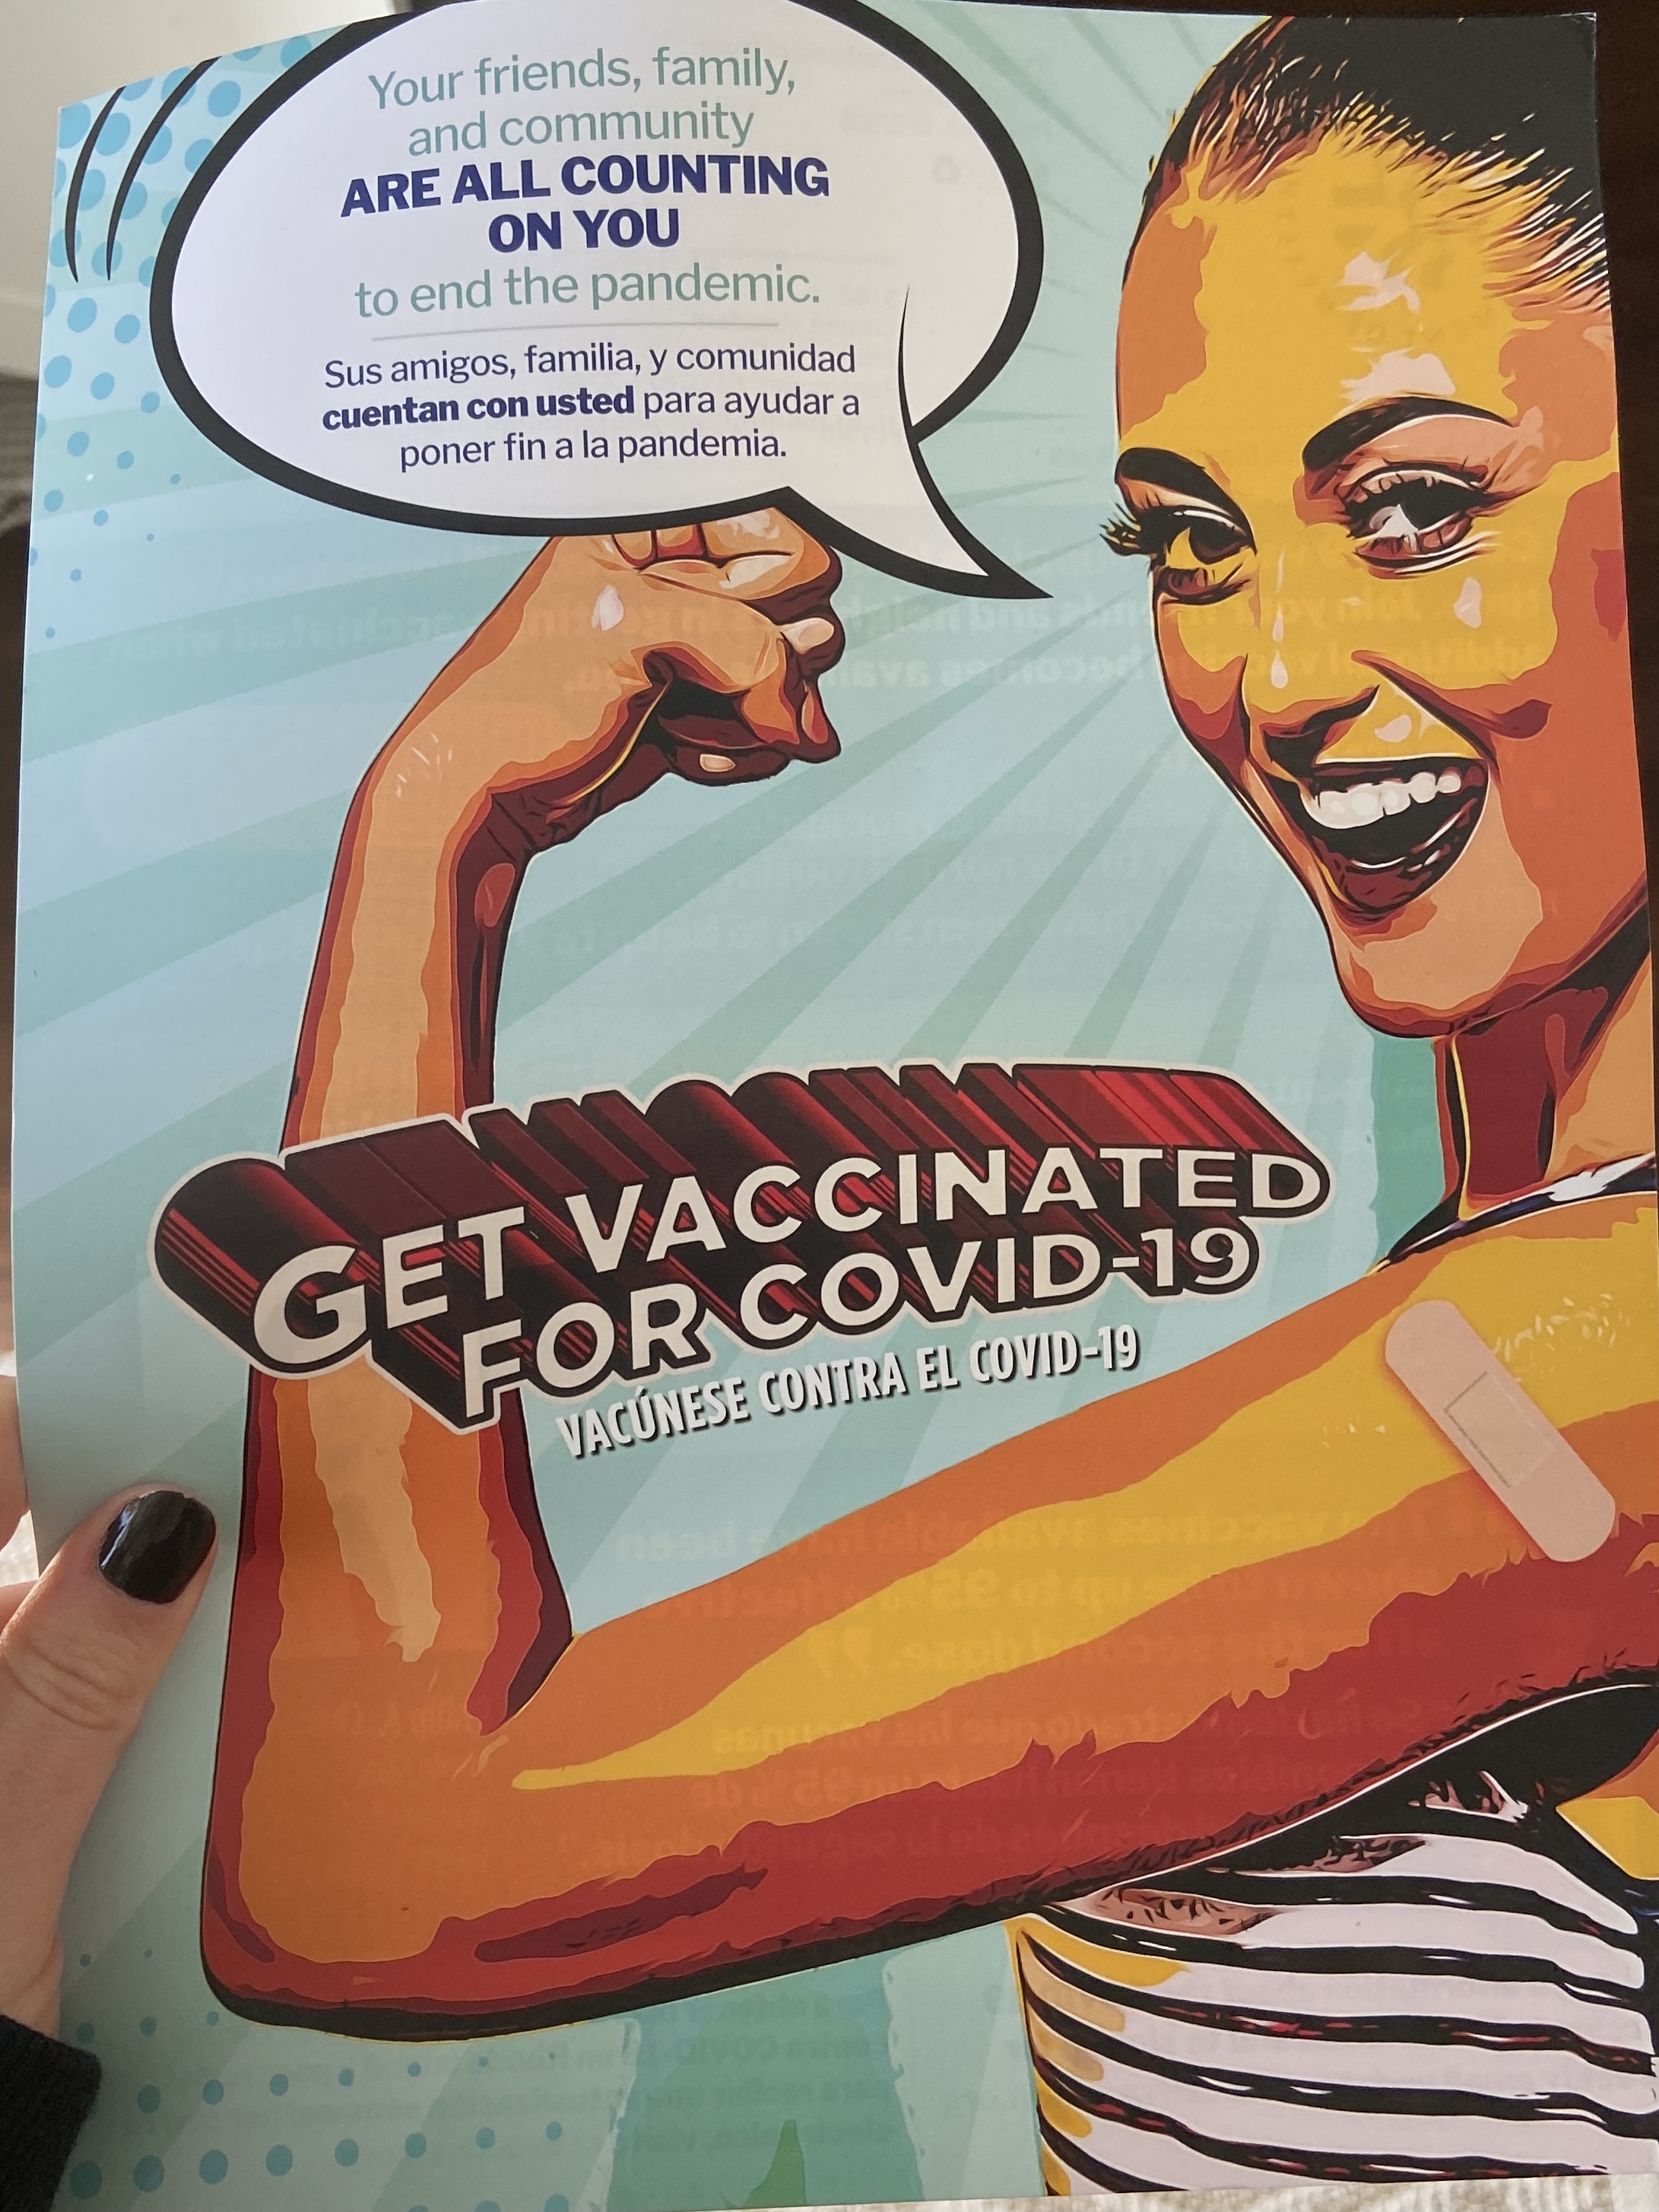 "Your friends, family, and community are ALL COUNTING ON YOU to end the pandemic. GET VACCINATED FOR COVID-19.